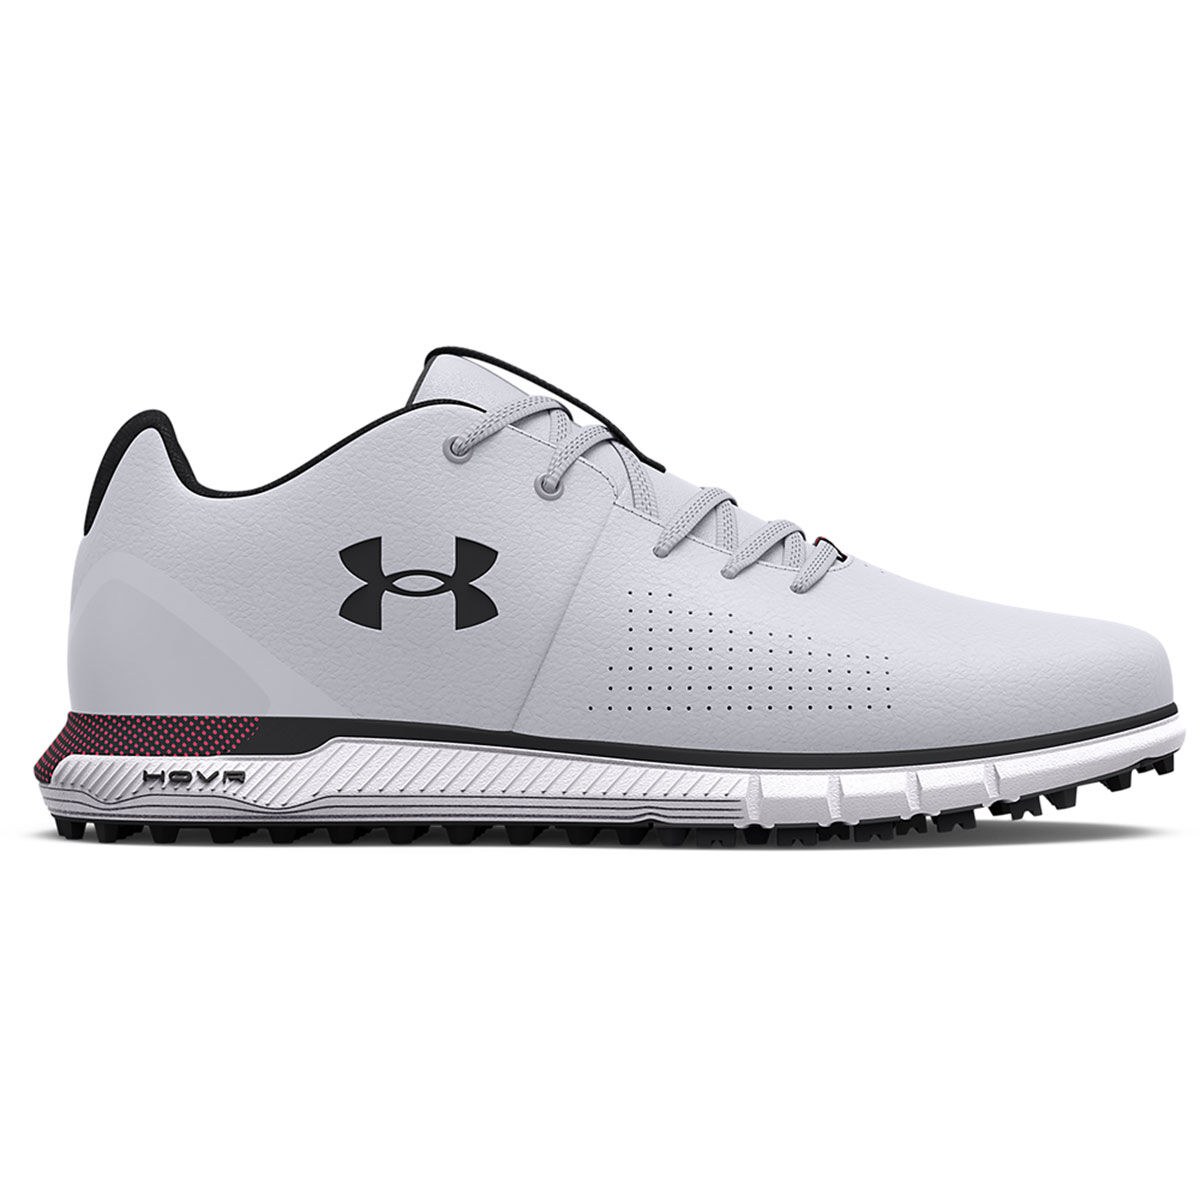 Under Armour Men’s HOVR Fade 2 Wide Spikeless Golf Shoes, Mens, Grey/black/black, 11 | American Golf